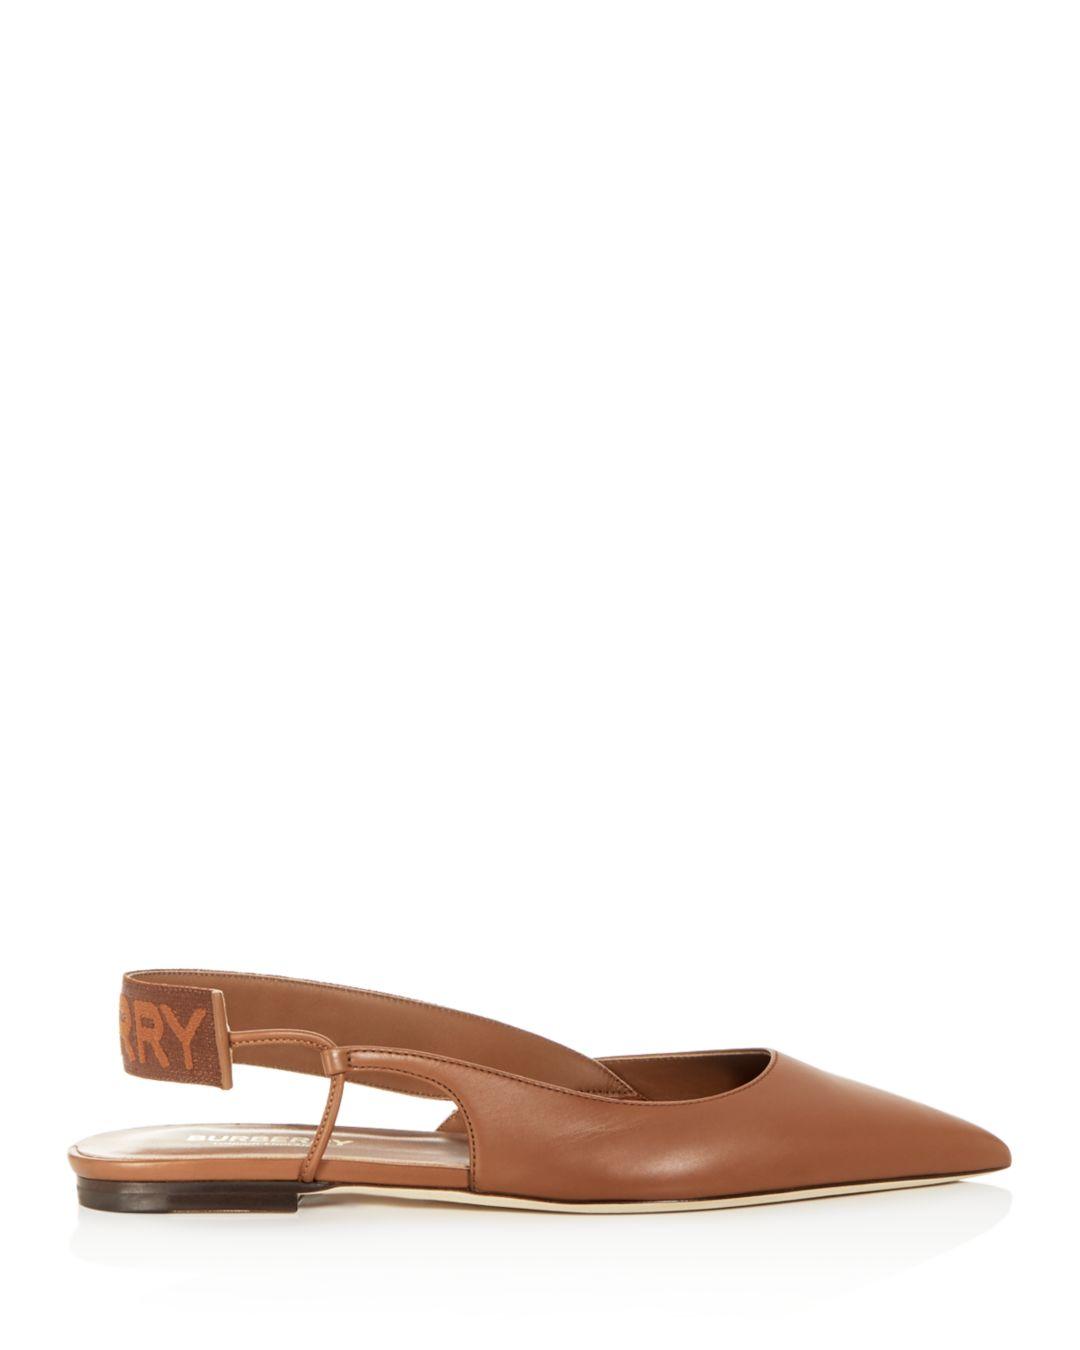 Burberry Maria Flat Slingback Ballet Flats in Brown | Lyst